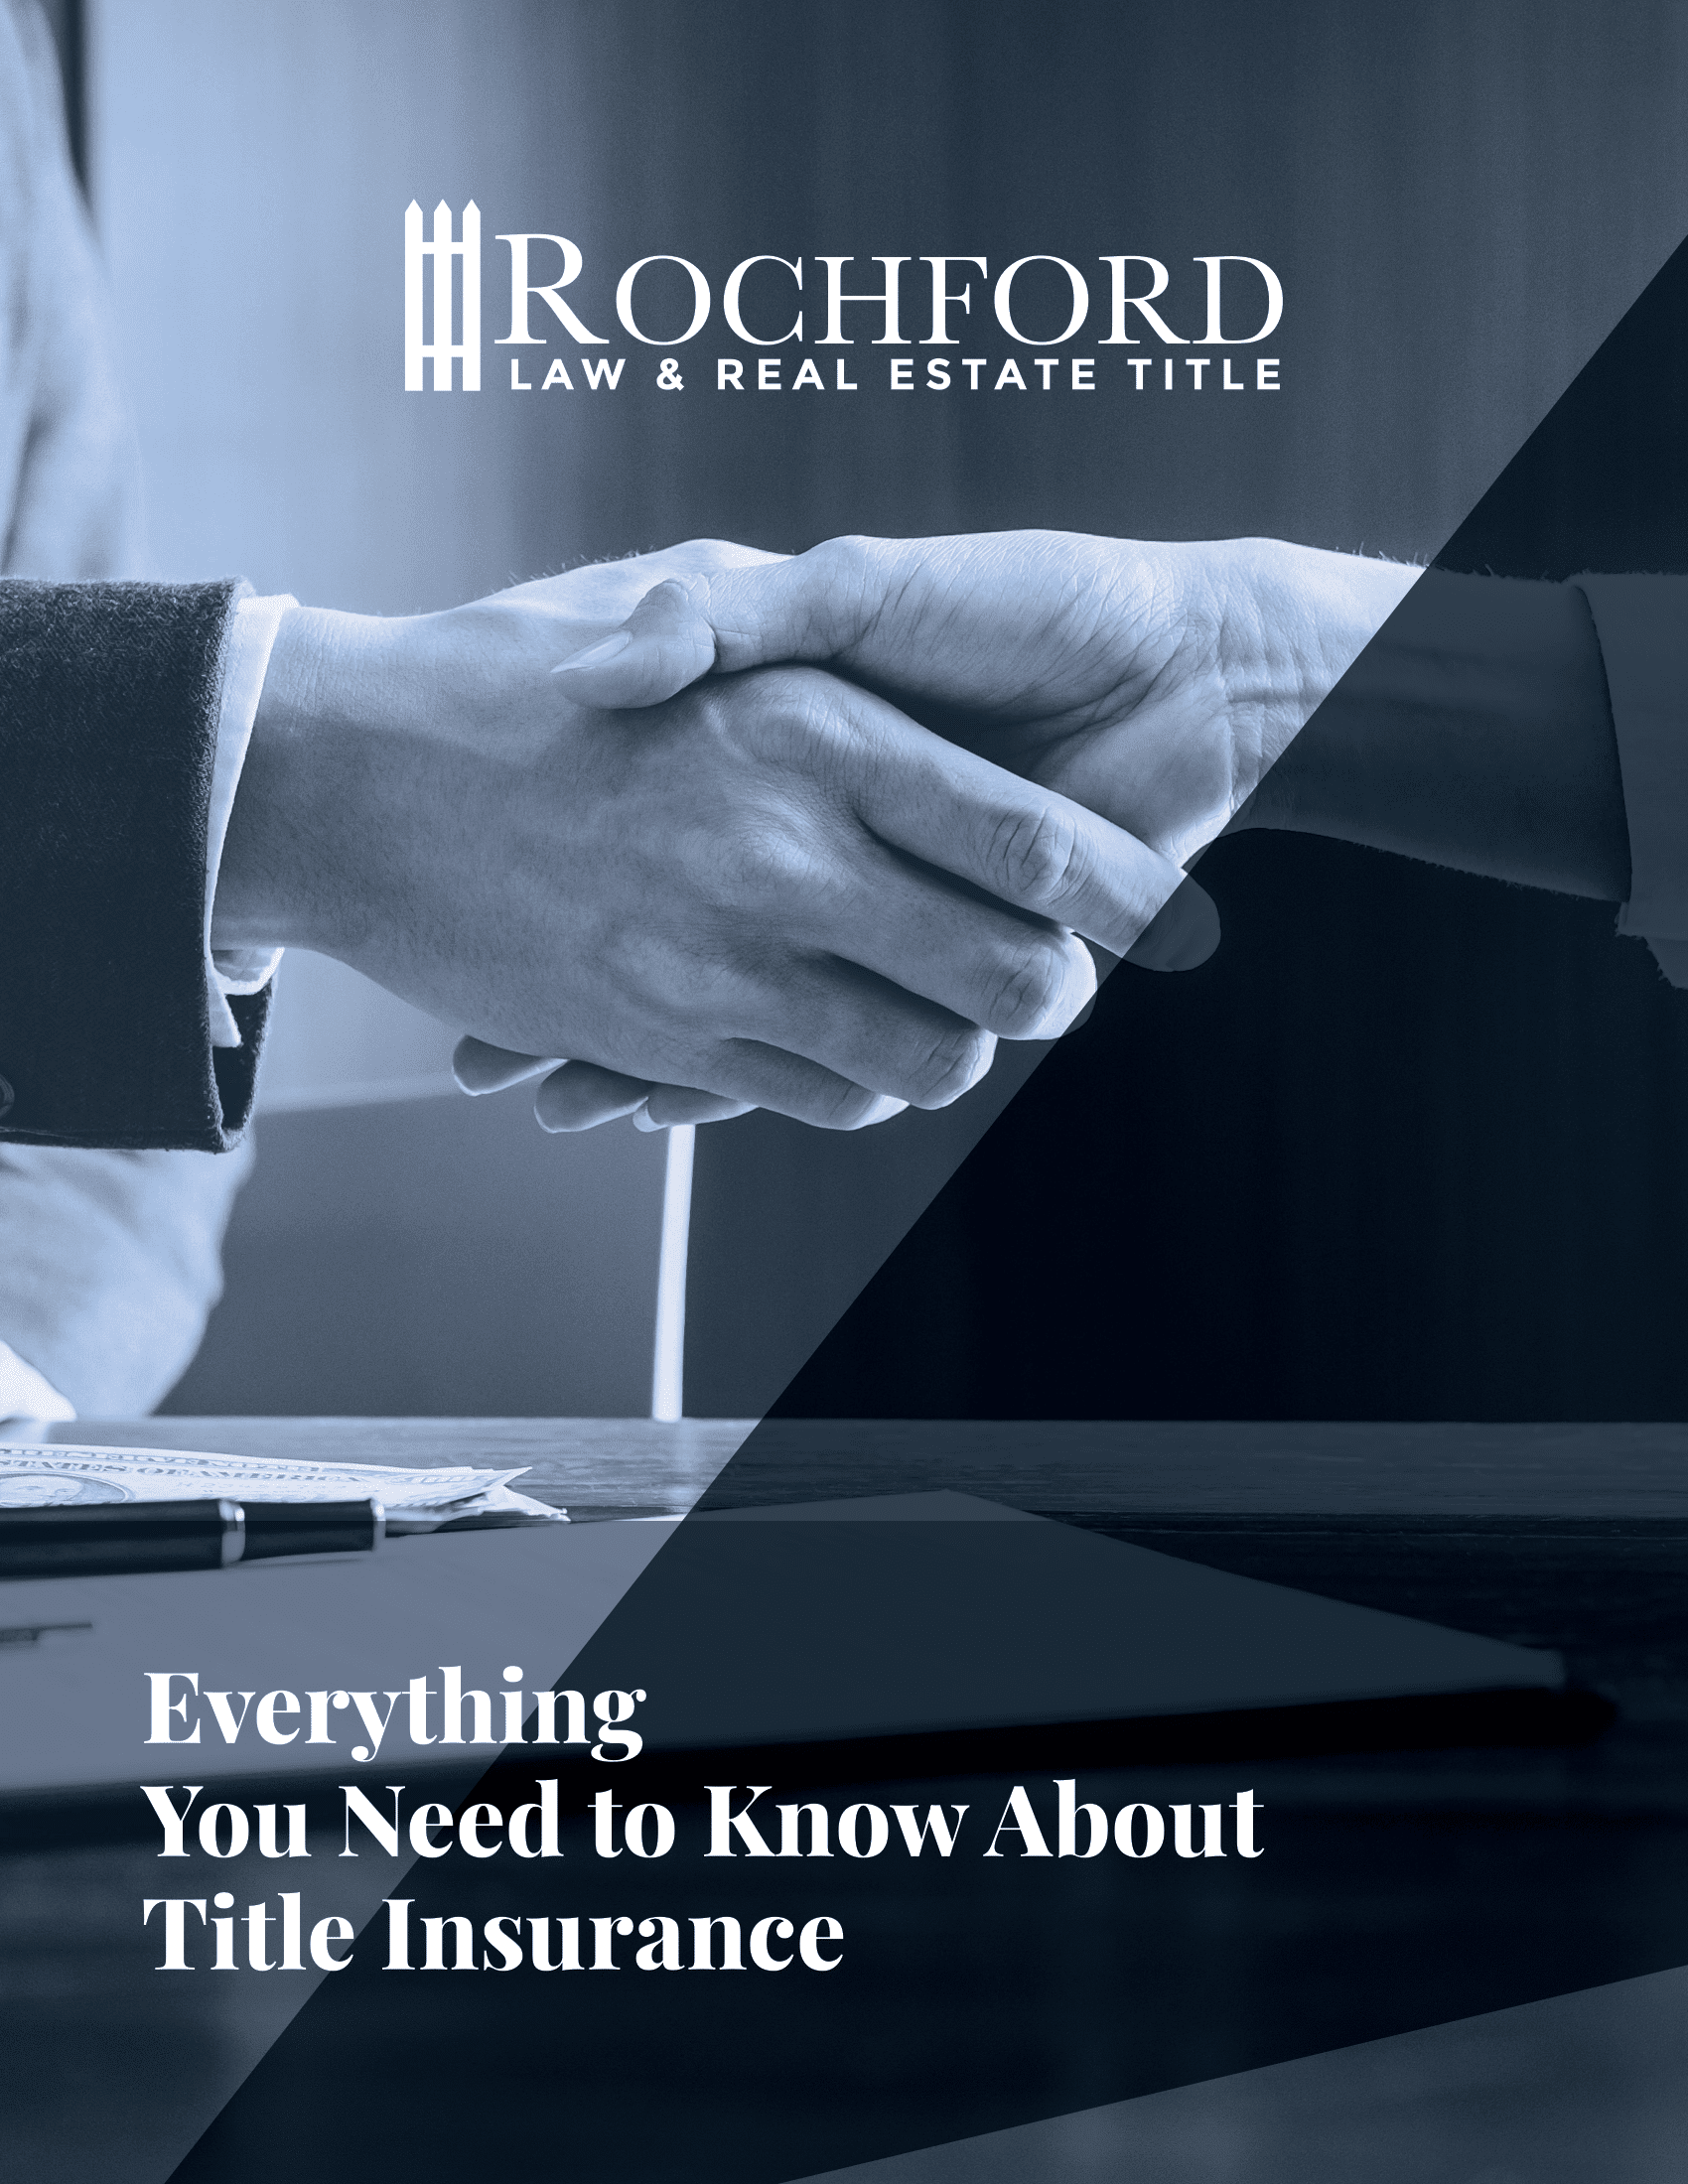 everything-you-need-to-know-about-title-insurance_rochford-law-and-real-estate-title_nashville-tn